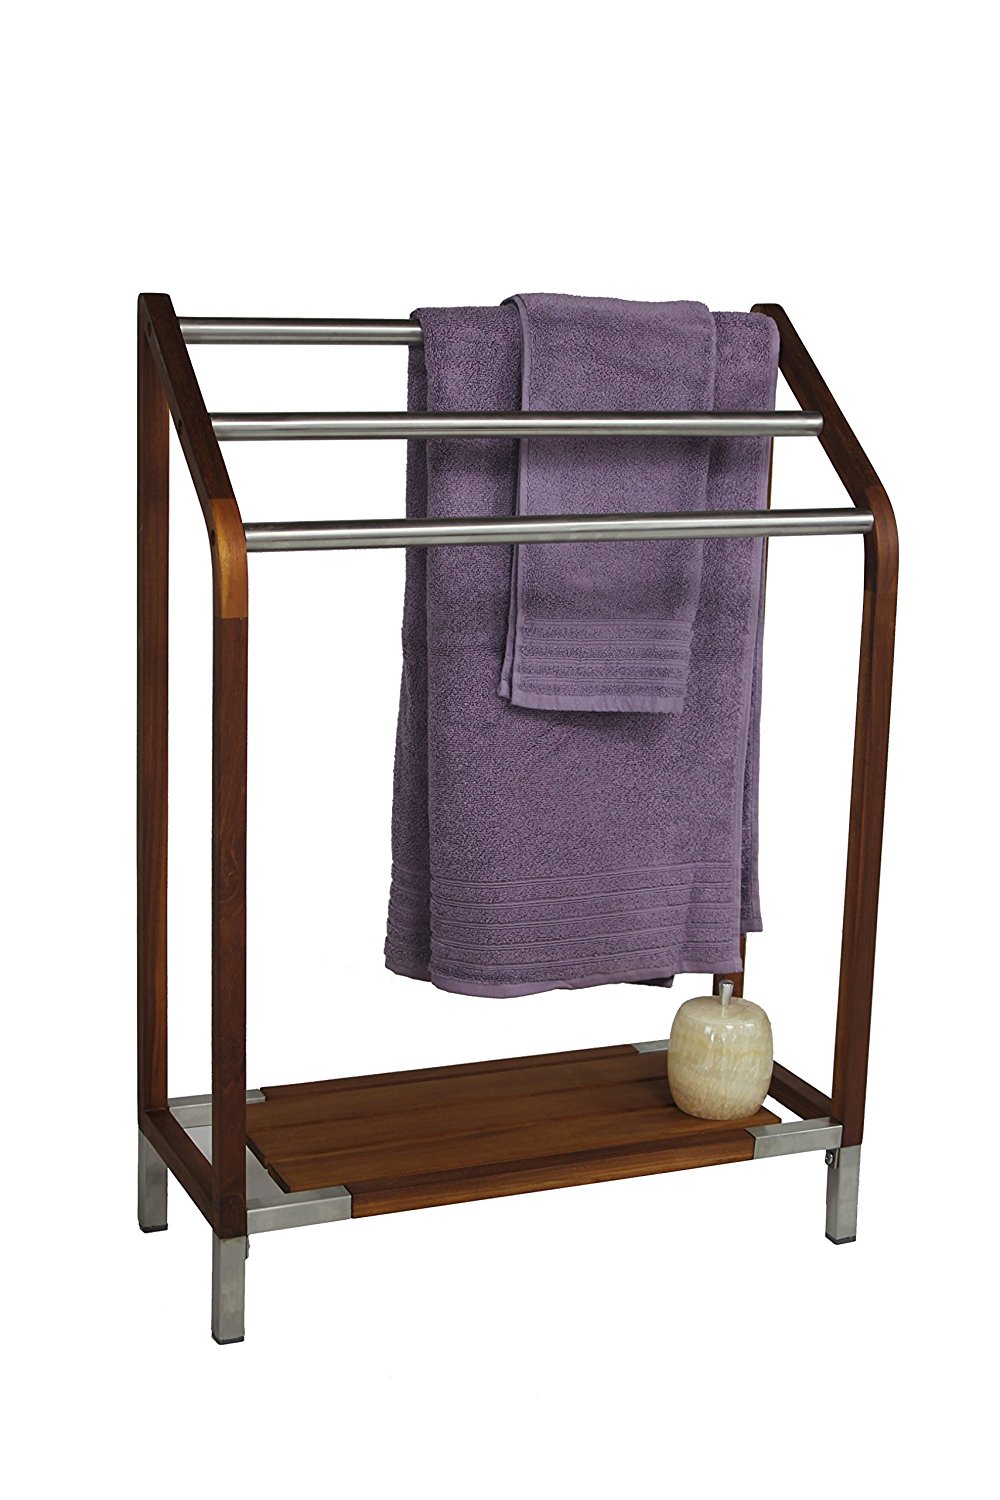 Sula Teak & Stainless Steel Towel Stand